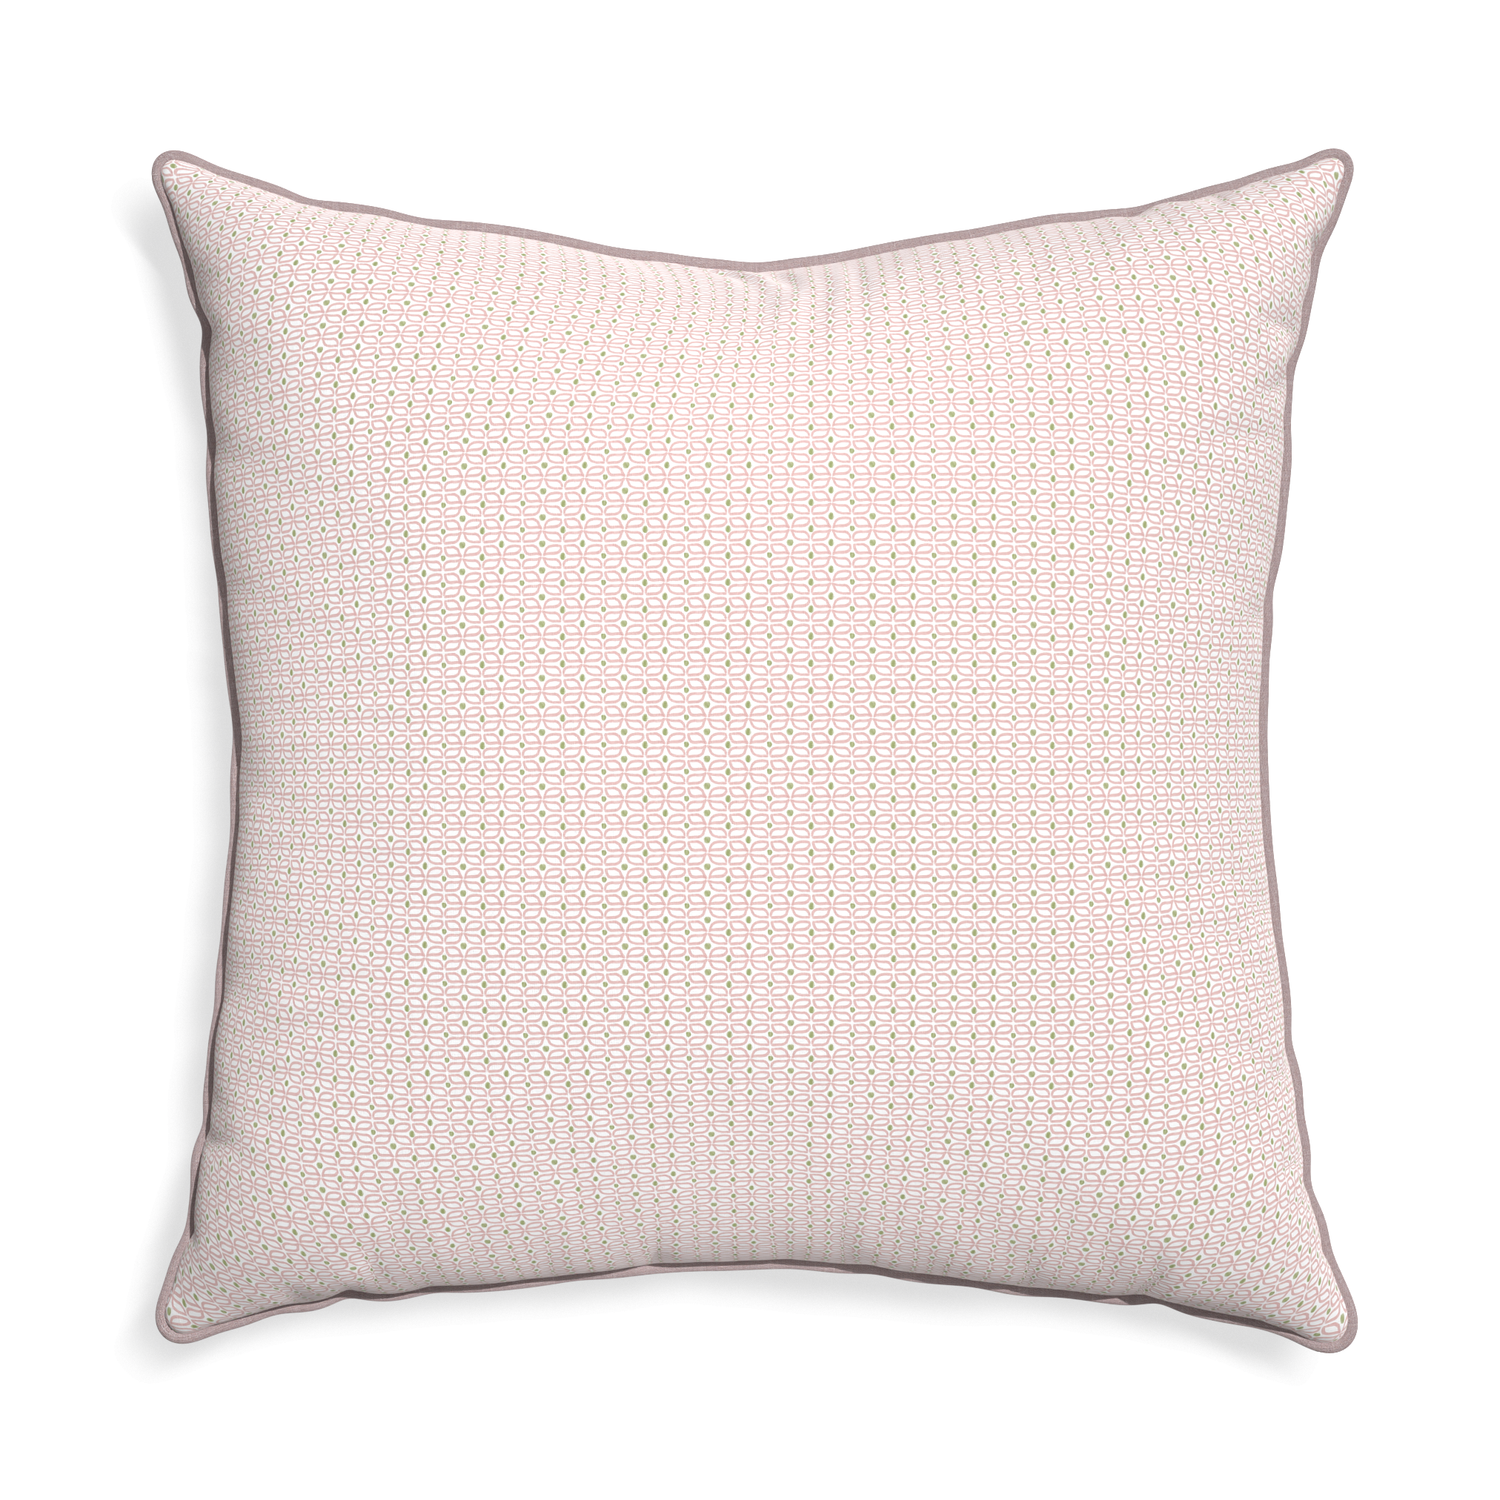 Euro-sham loomi pink custom pink geometricpillow with orchid piping on white background